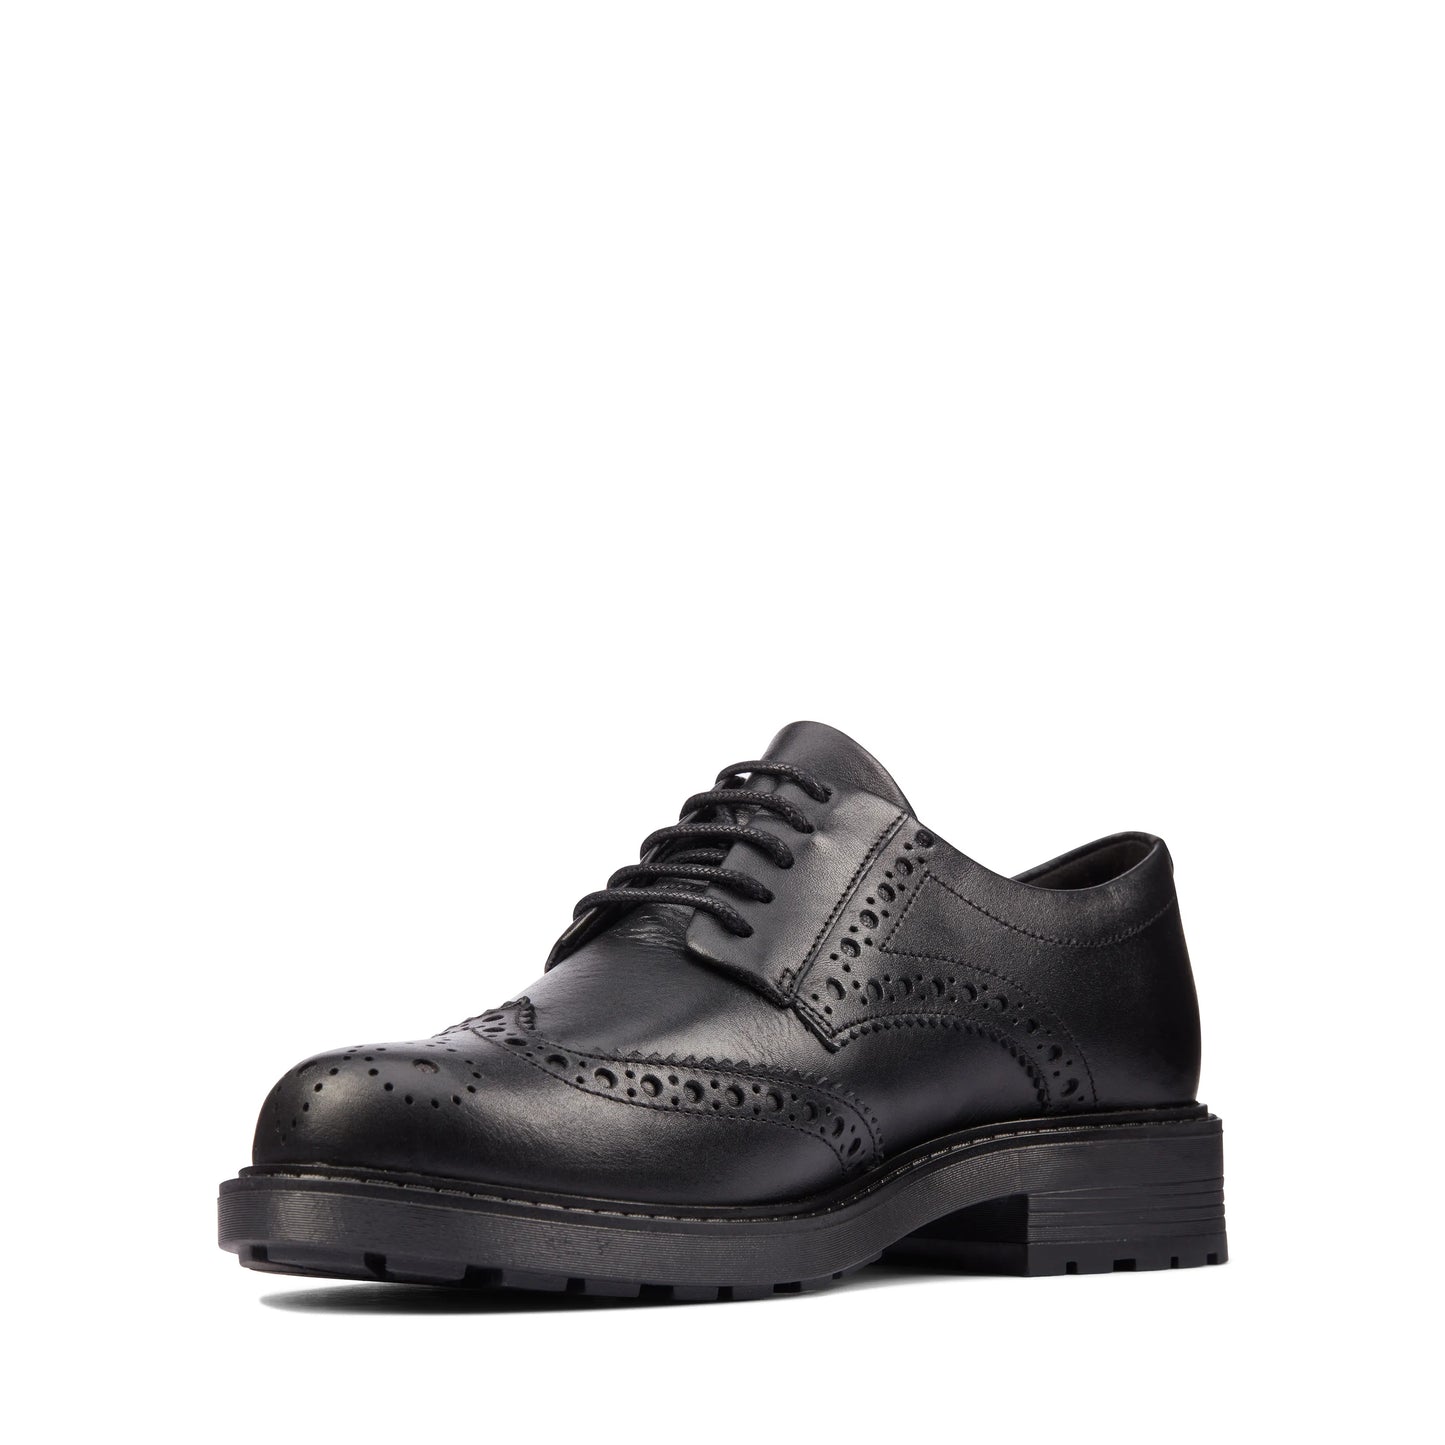 CLARKS | DERBY SHOES FOR WOMEN | ORINOCO2 LIMIT BLACK LEATHER | NERO